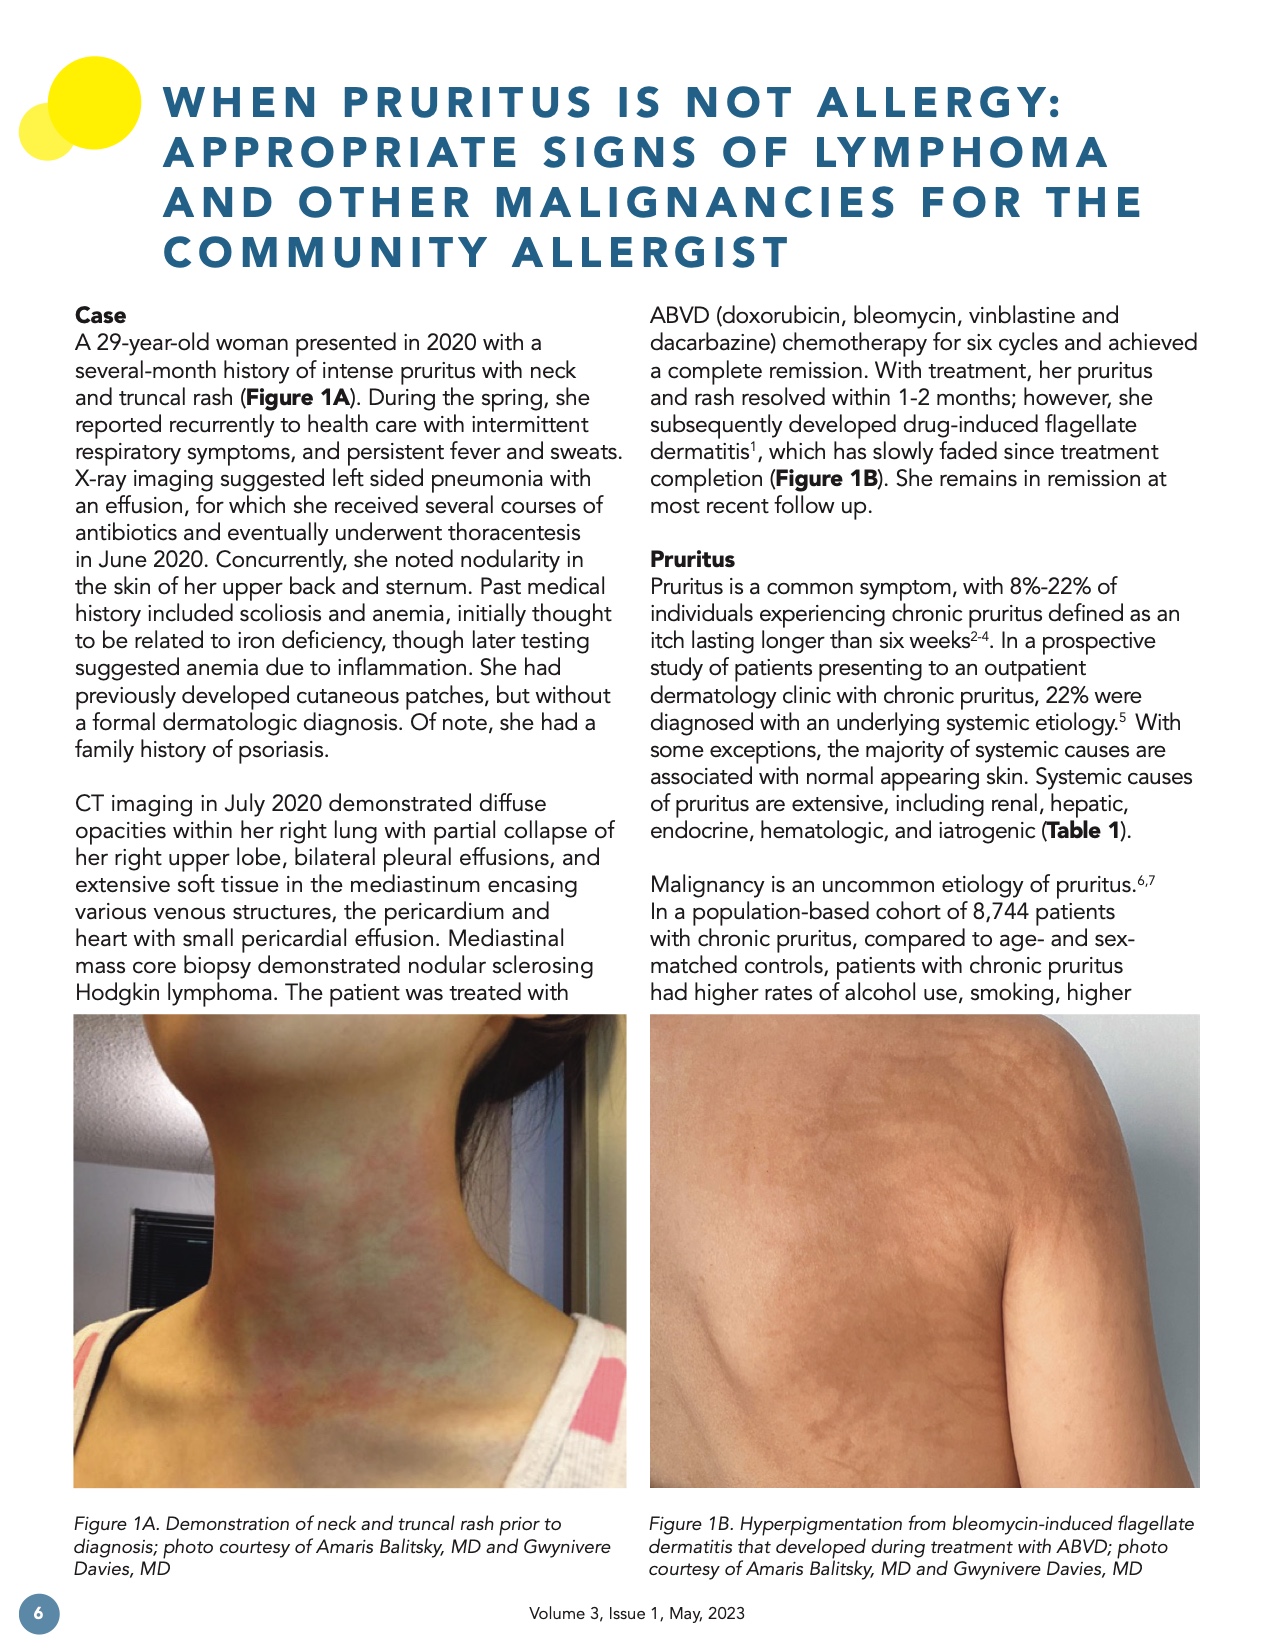 When pruritus is not allergy: appropriate signs of lymphoma and other malignancies for the community allergiest